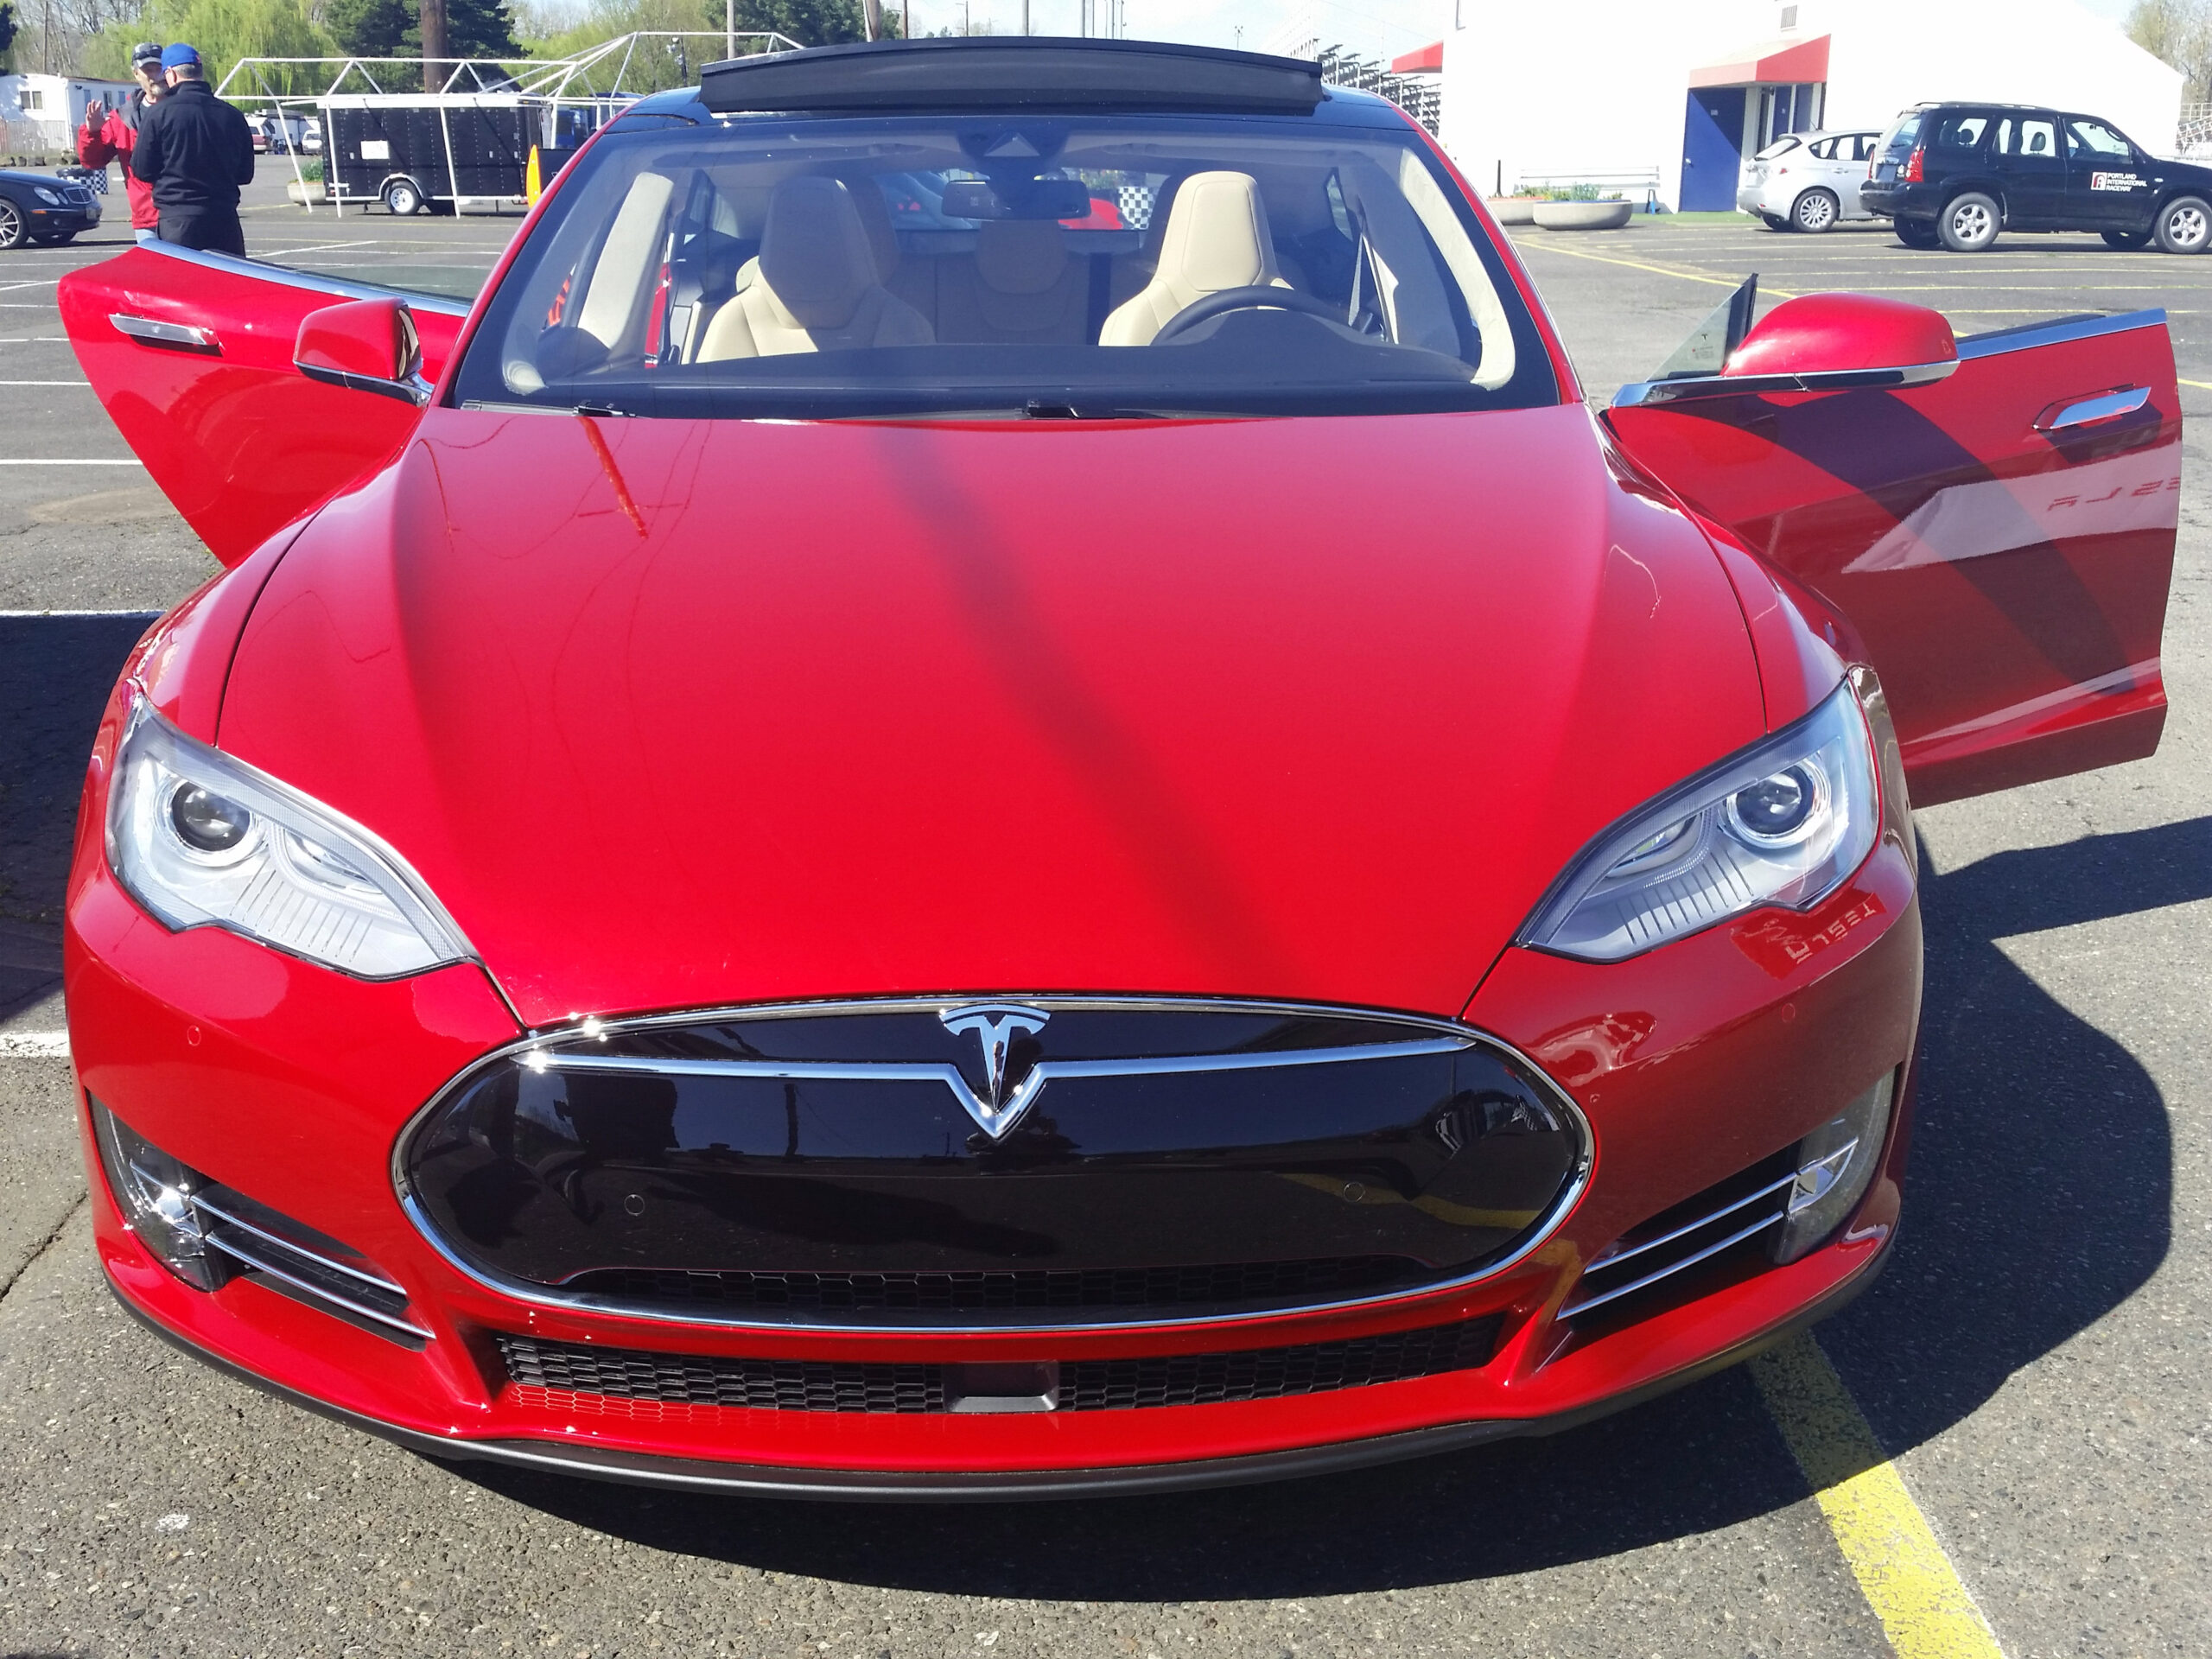 ‘Summon’ Feature Lets Tesla Vehicles Park Themselves With No Driver In The Seat